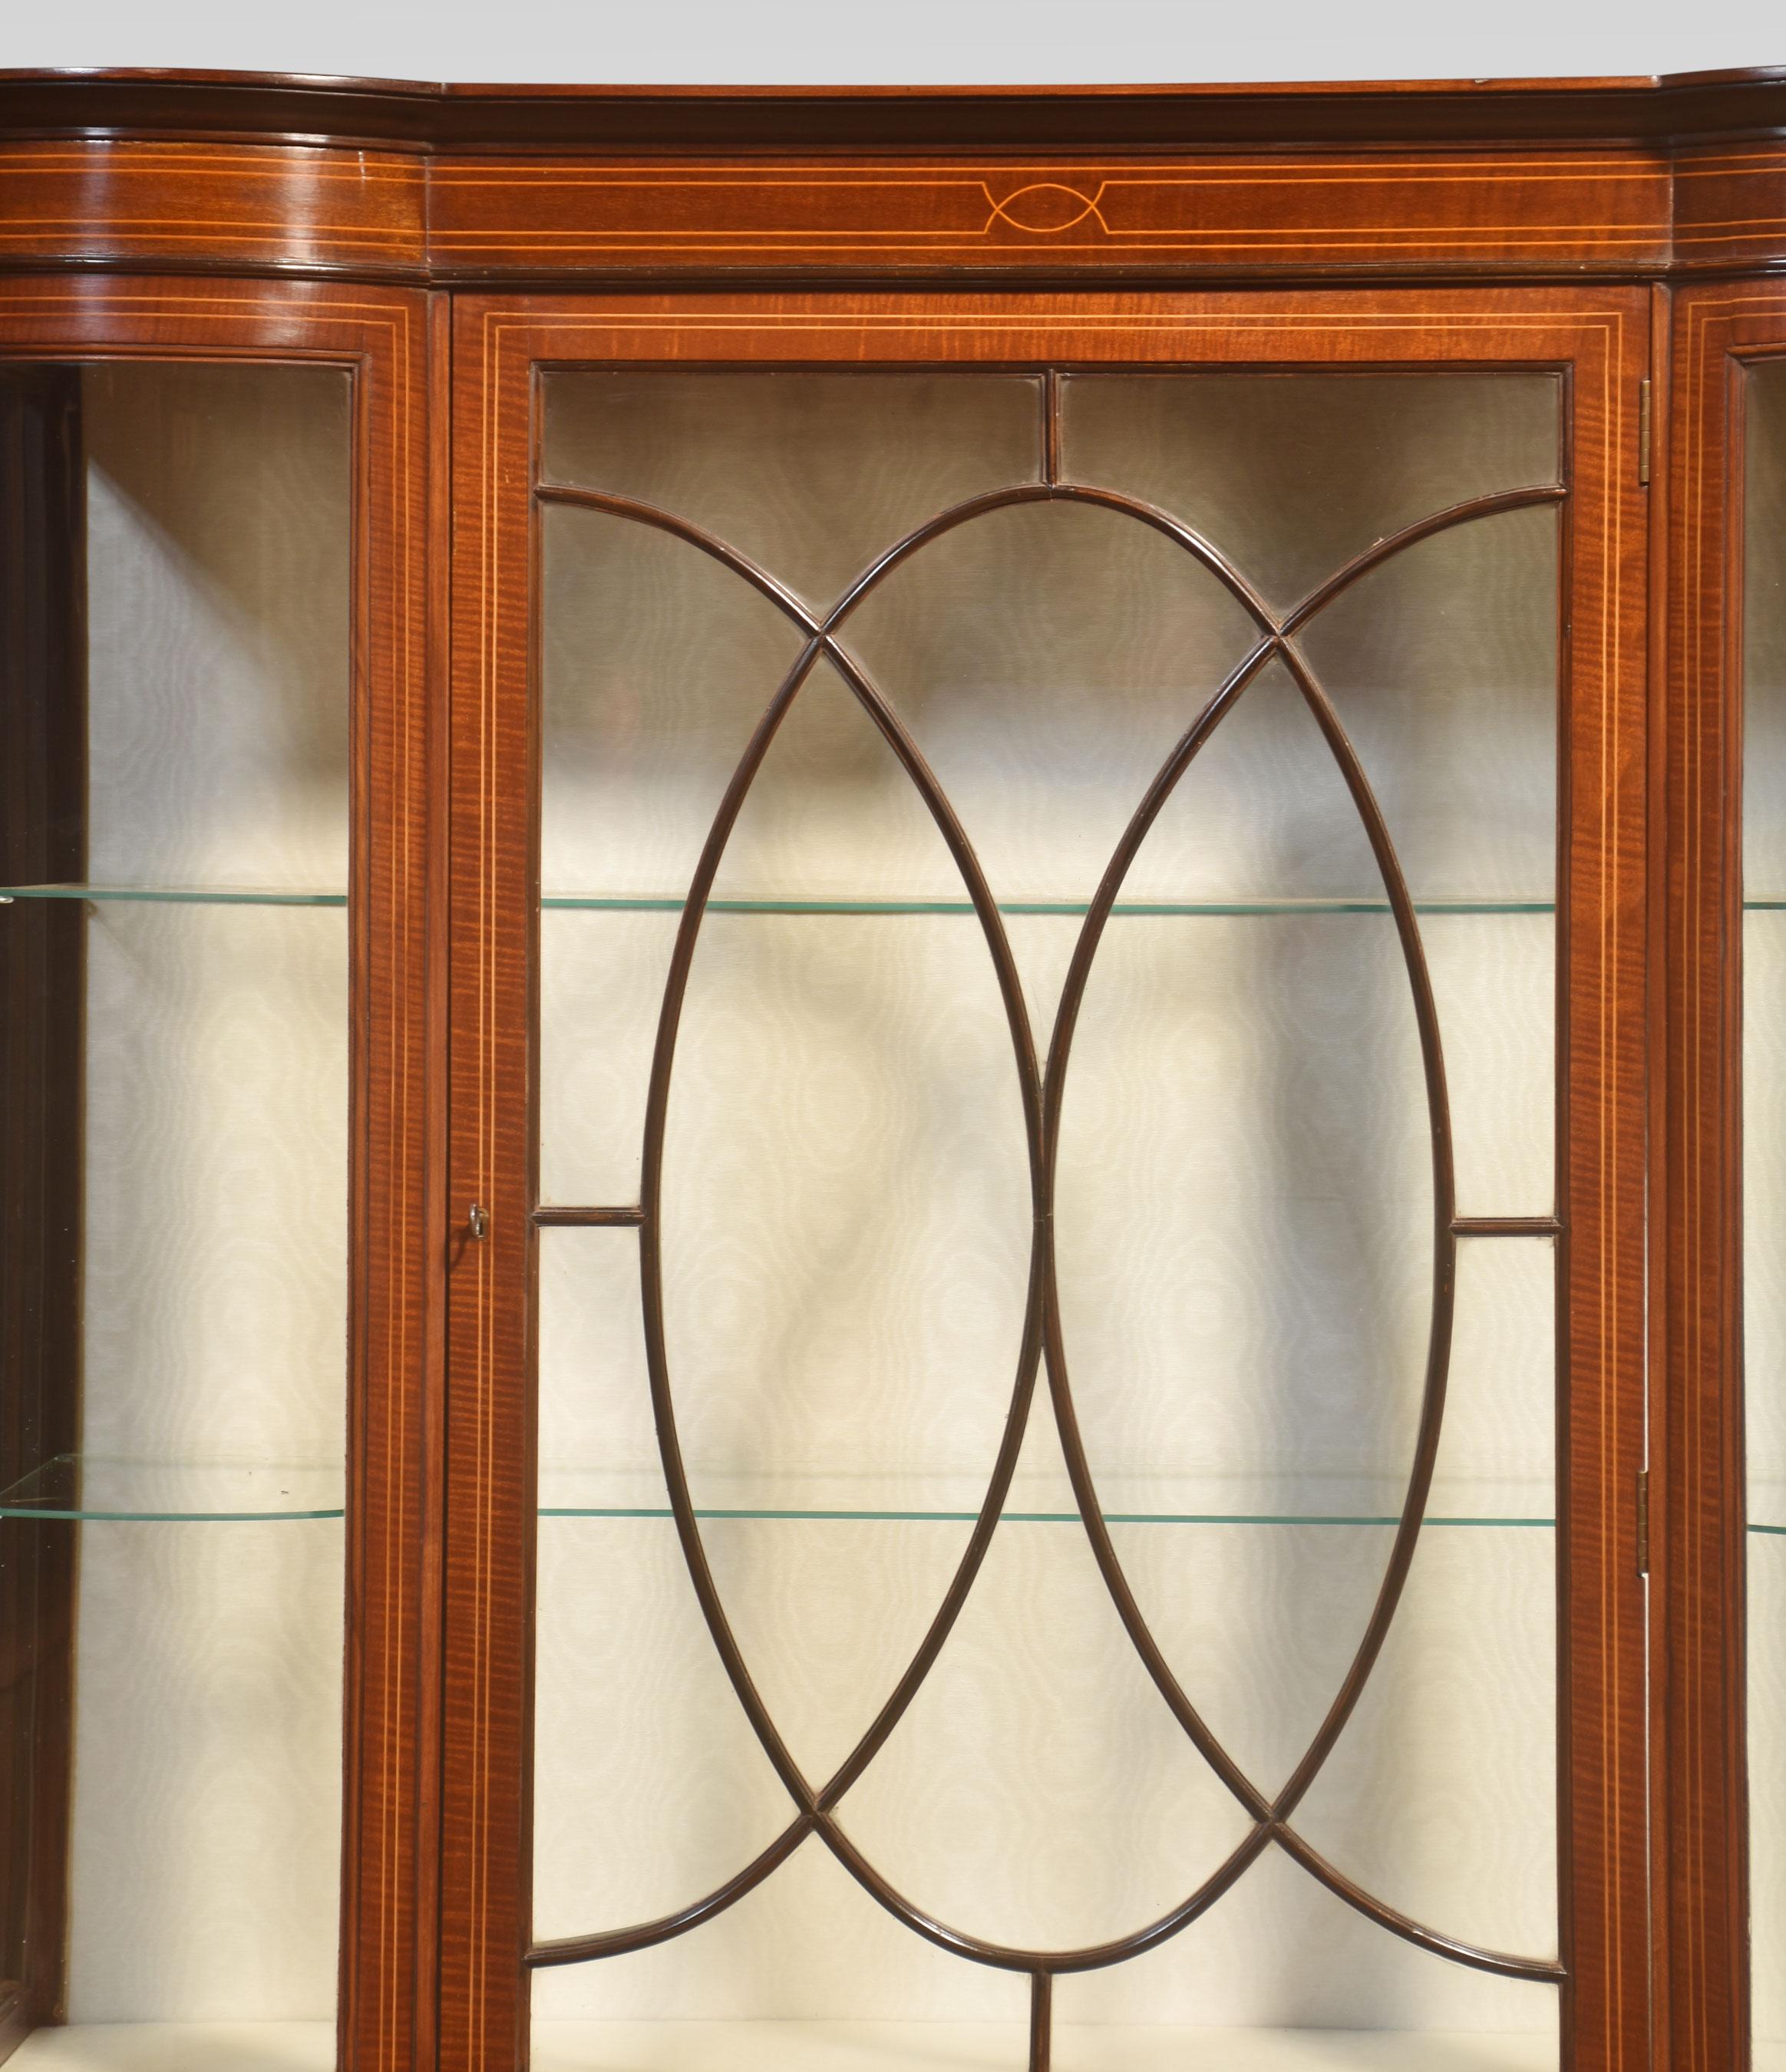 Mahogany display cabinet. Having a large central glazed door enclosing glass shelves and a watermark silk upholstered interior, flanked by bowed ends. All raised up on tapering supports.
Dimensions
Height 69.5 Inches
Width 48.5 Inches
Depth 17 Inches